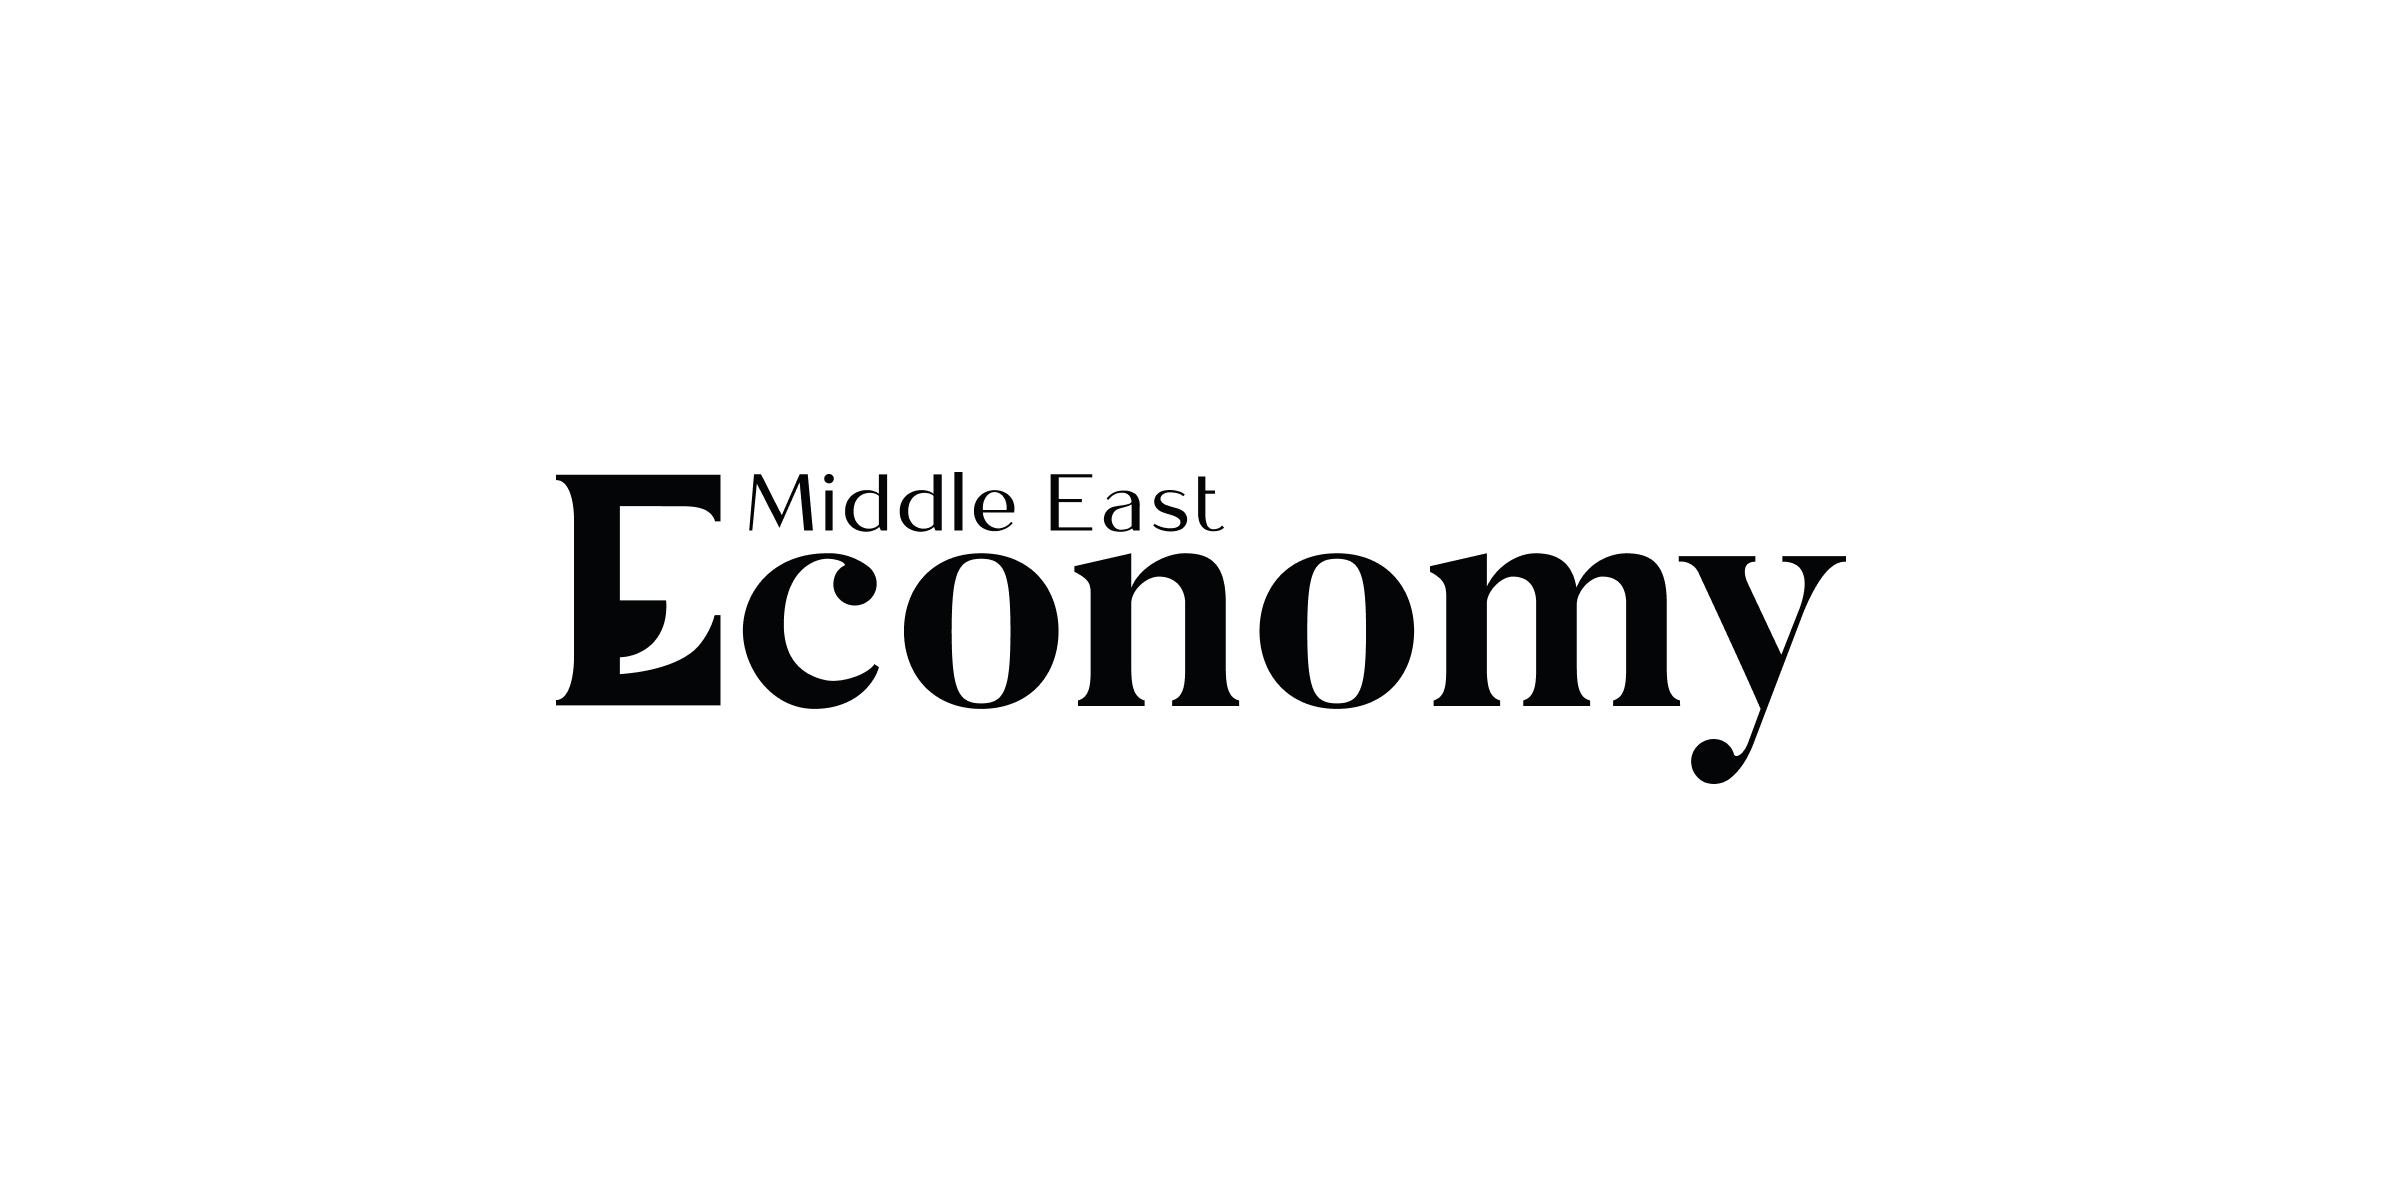 etisalat by e&, Builder.ai, partner to support UAE-based SMBs